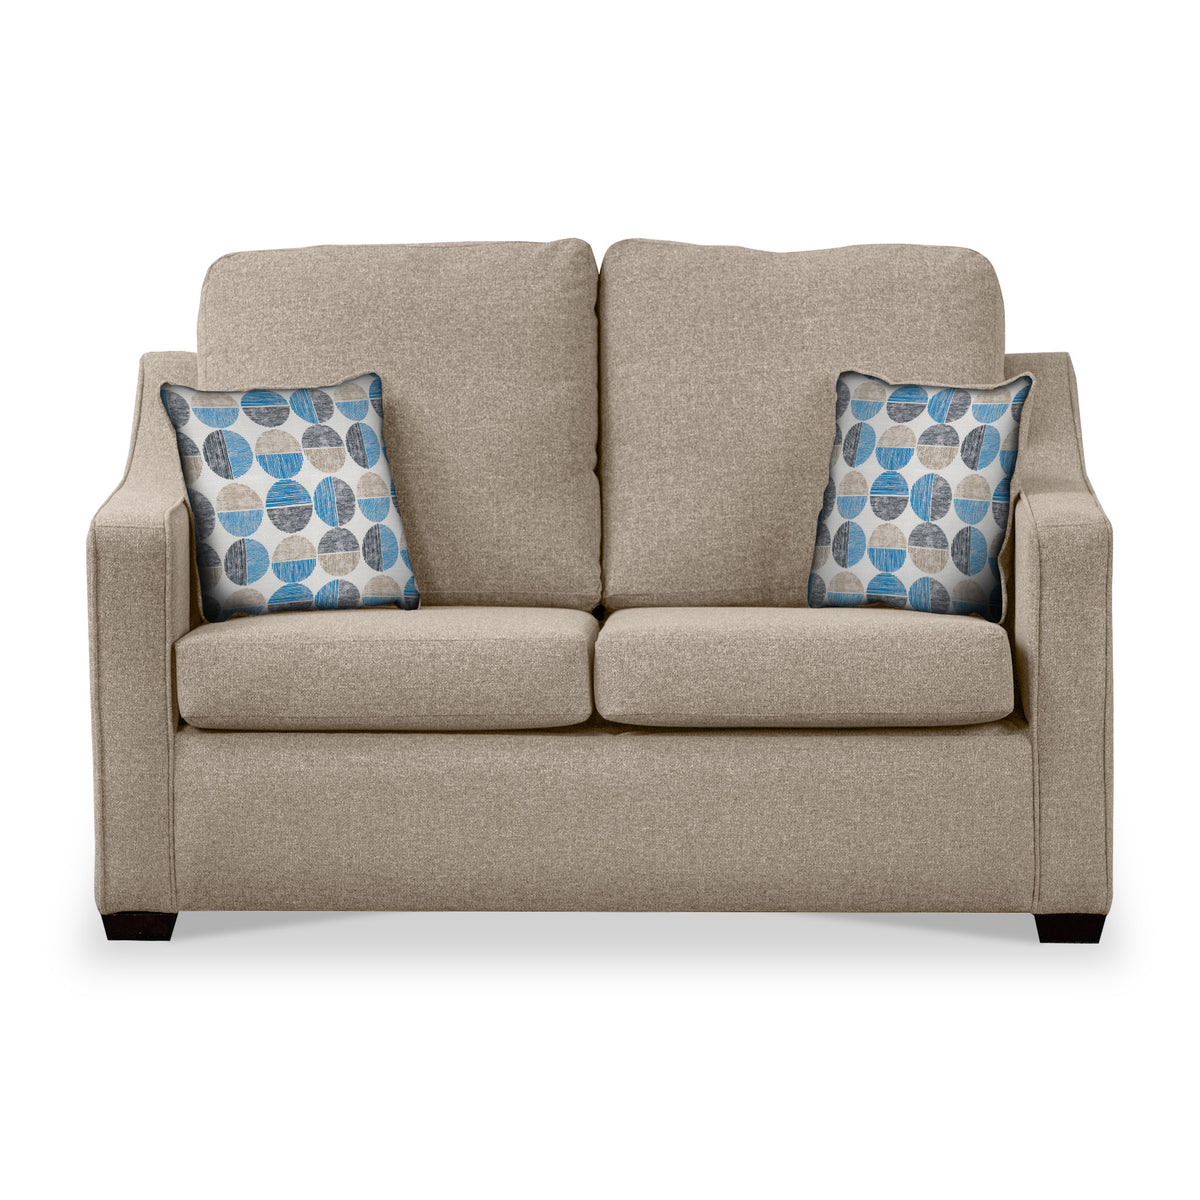 Charlcote Oatmeal Faux Linen 2 Seater Sofabed with Blue Scatter Cushions from Roseland Furniture